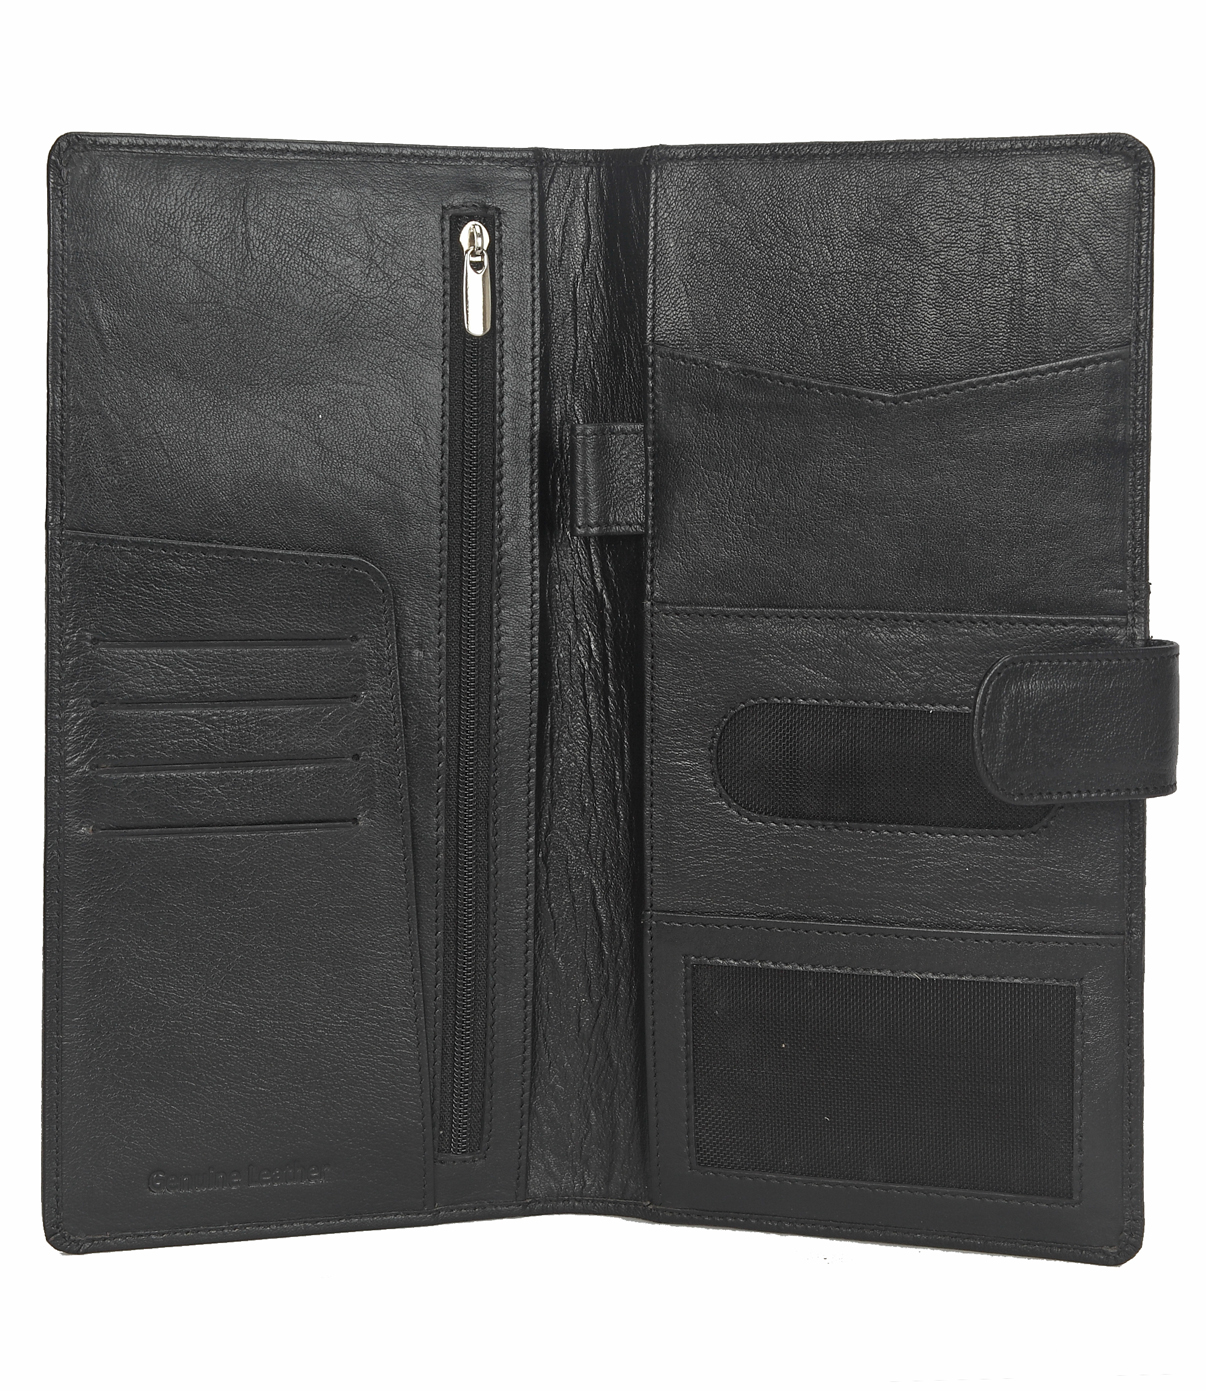 Wallet-Cynthia-Unisex wallet for travel documents in Genuine Leather - Black